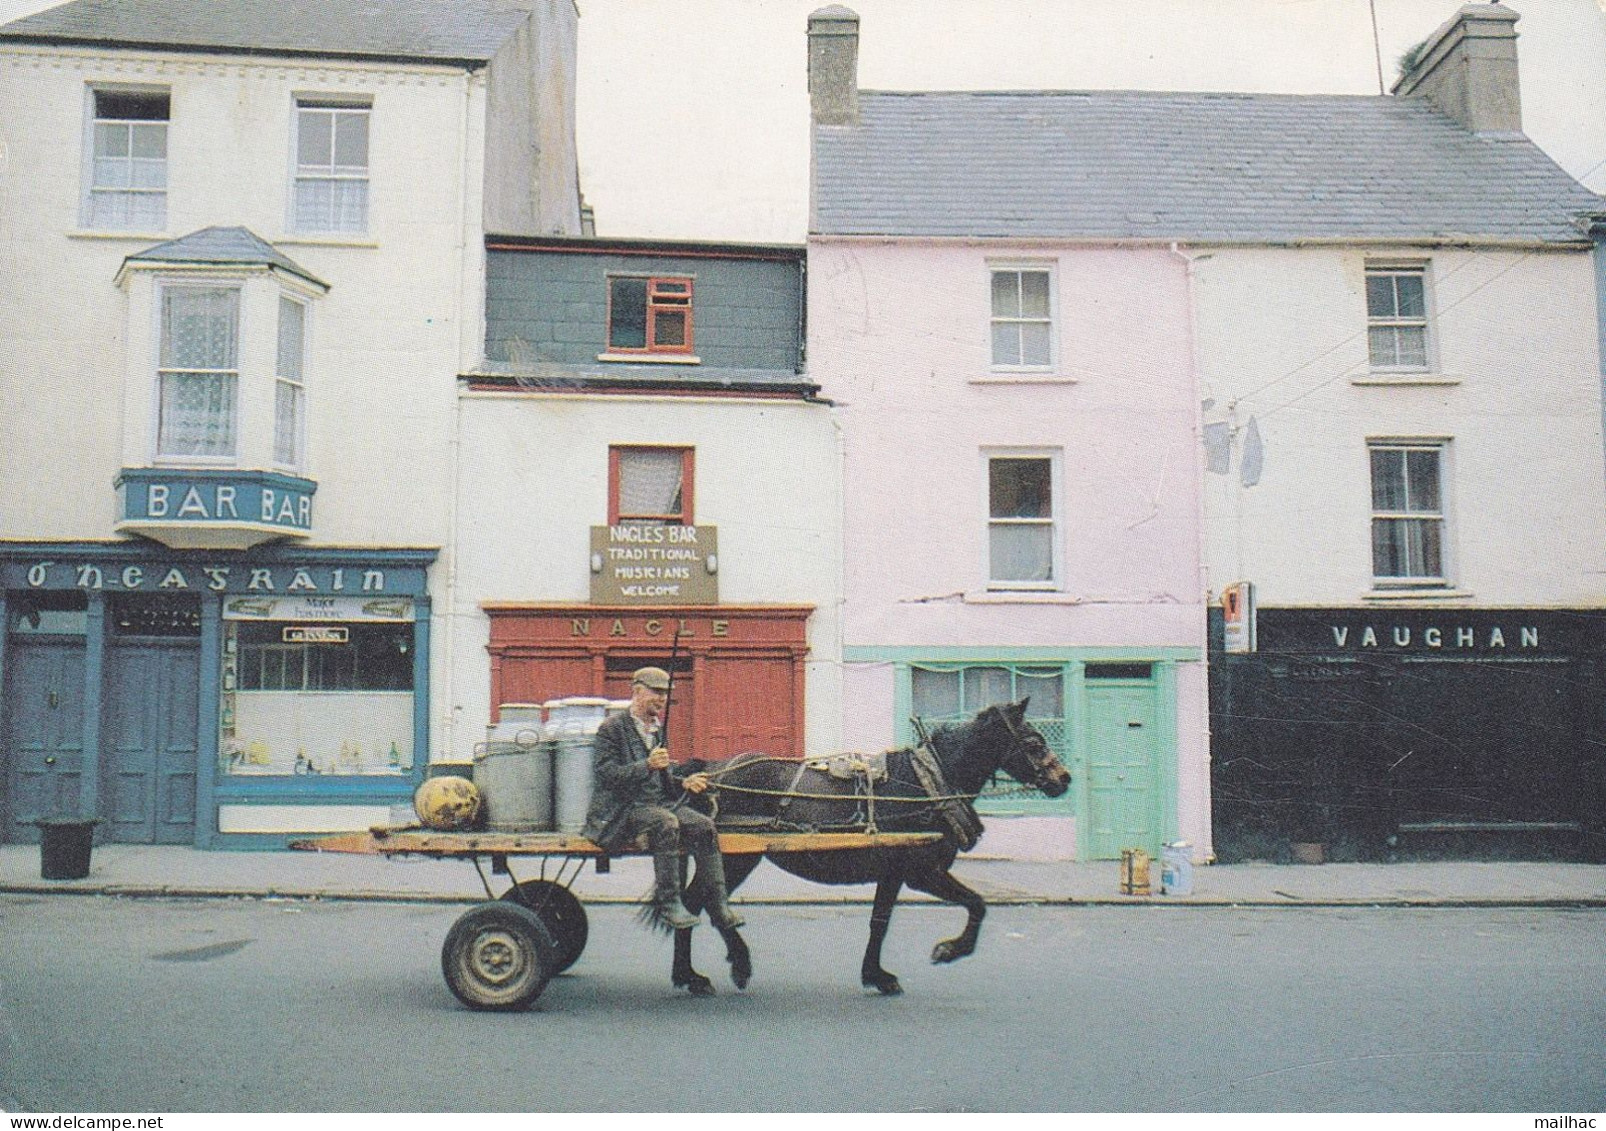 IRELAND - ENNISTYMON - On The Way To The Creamery - Laitier - Voiture à Cheval - Non Voyagée - Mint - Clare